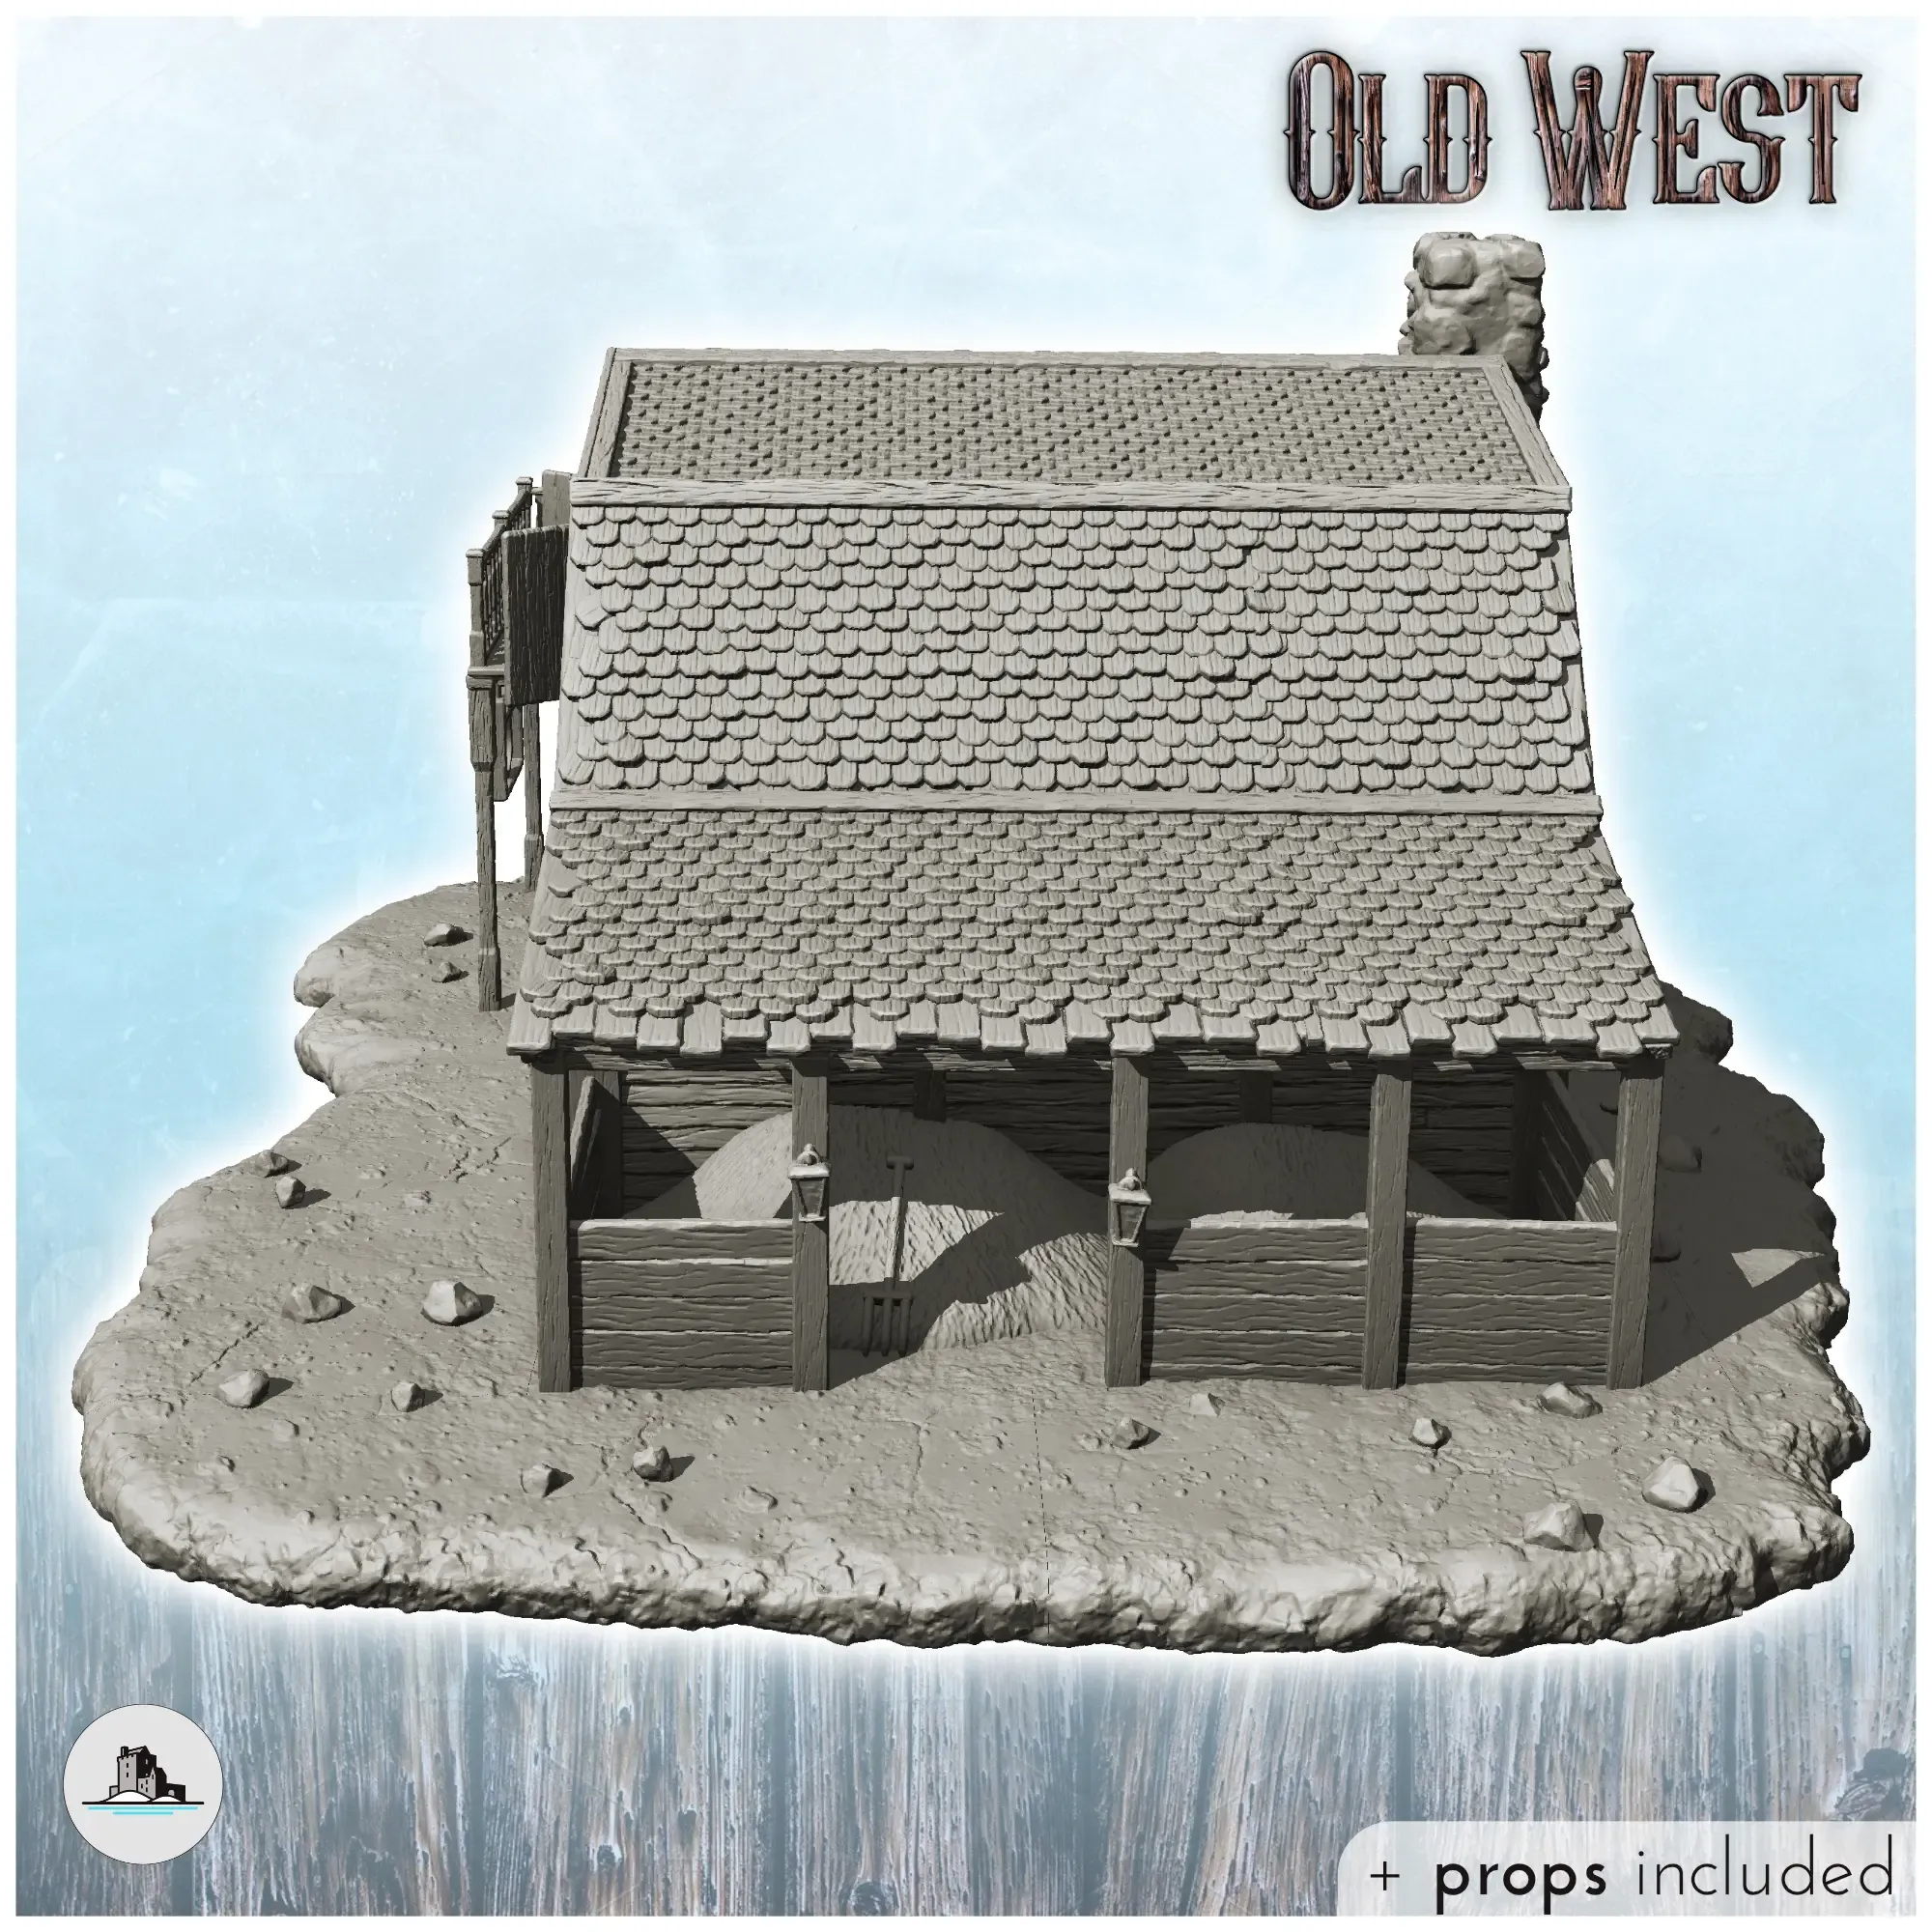 Farrier's workshop with barn and balcony - Terrain scenery